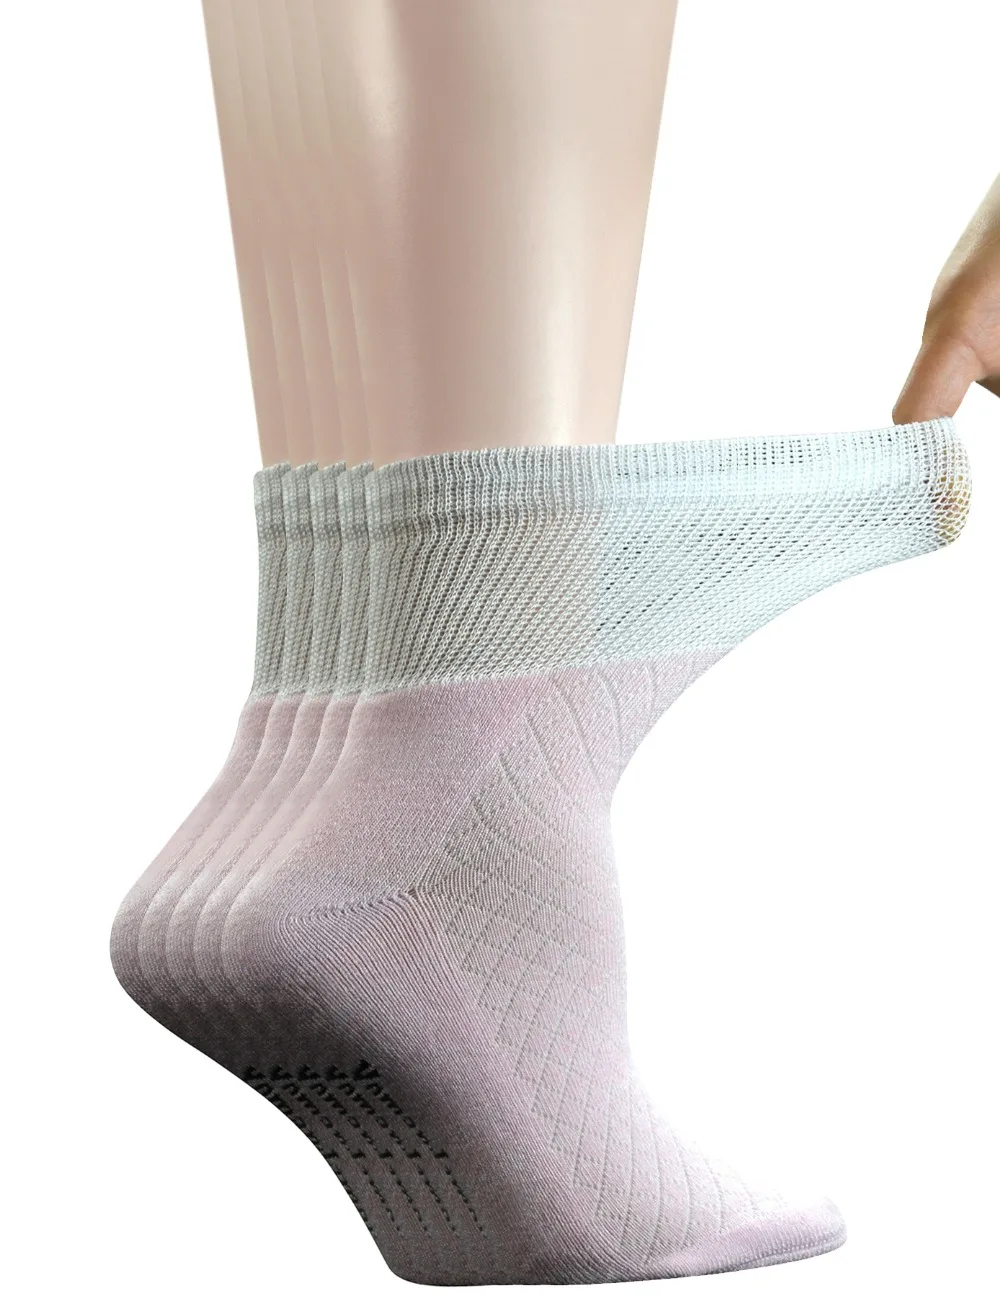 5 Pairs Women's Bamboo Quarter Breathable Diabetic Socks with Seamless ...